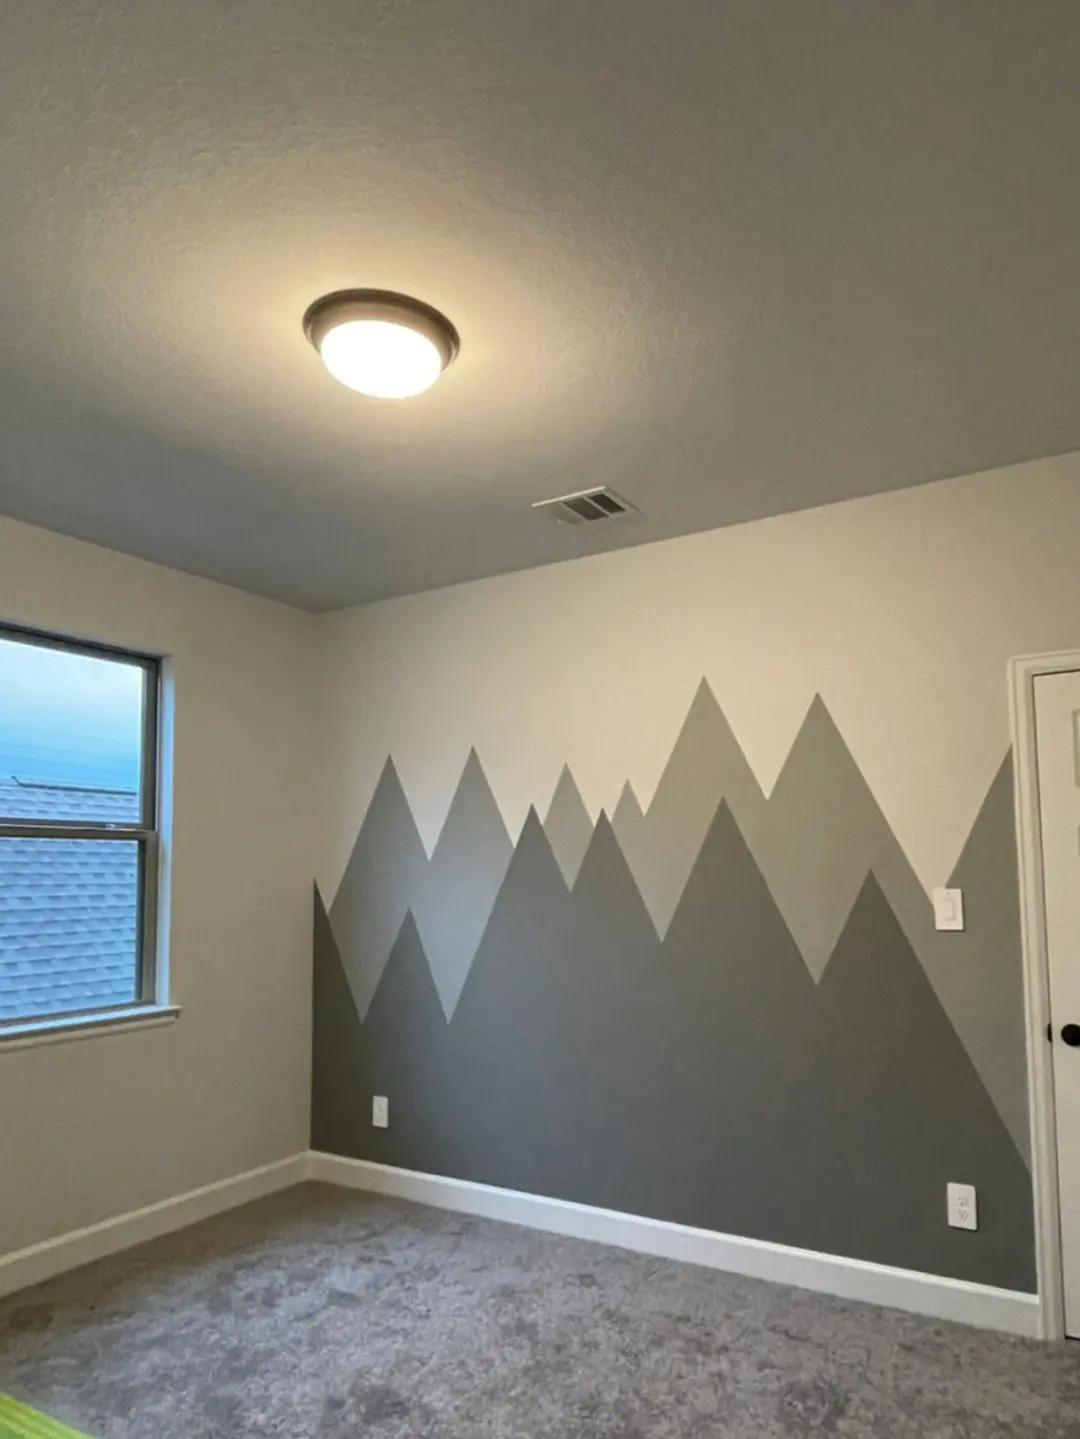 Bedroom accent wall paint ideas, when it comes to decorating your bedroom, the accent wall can serve as a focal point, adding depth, interest,